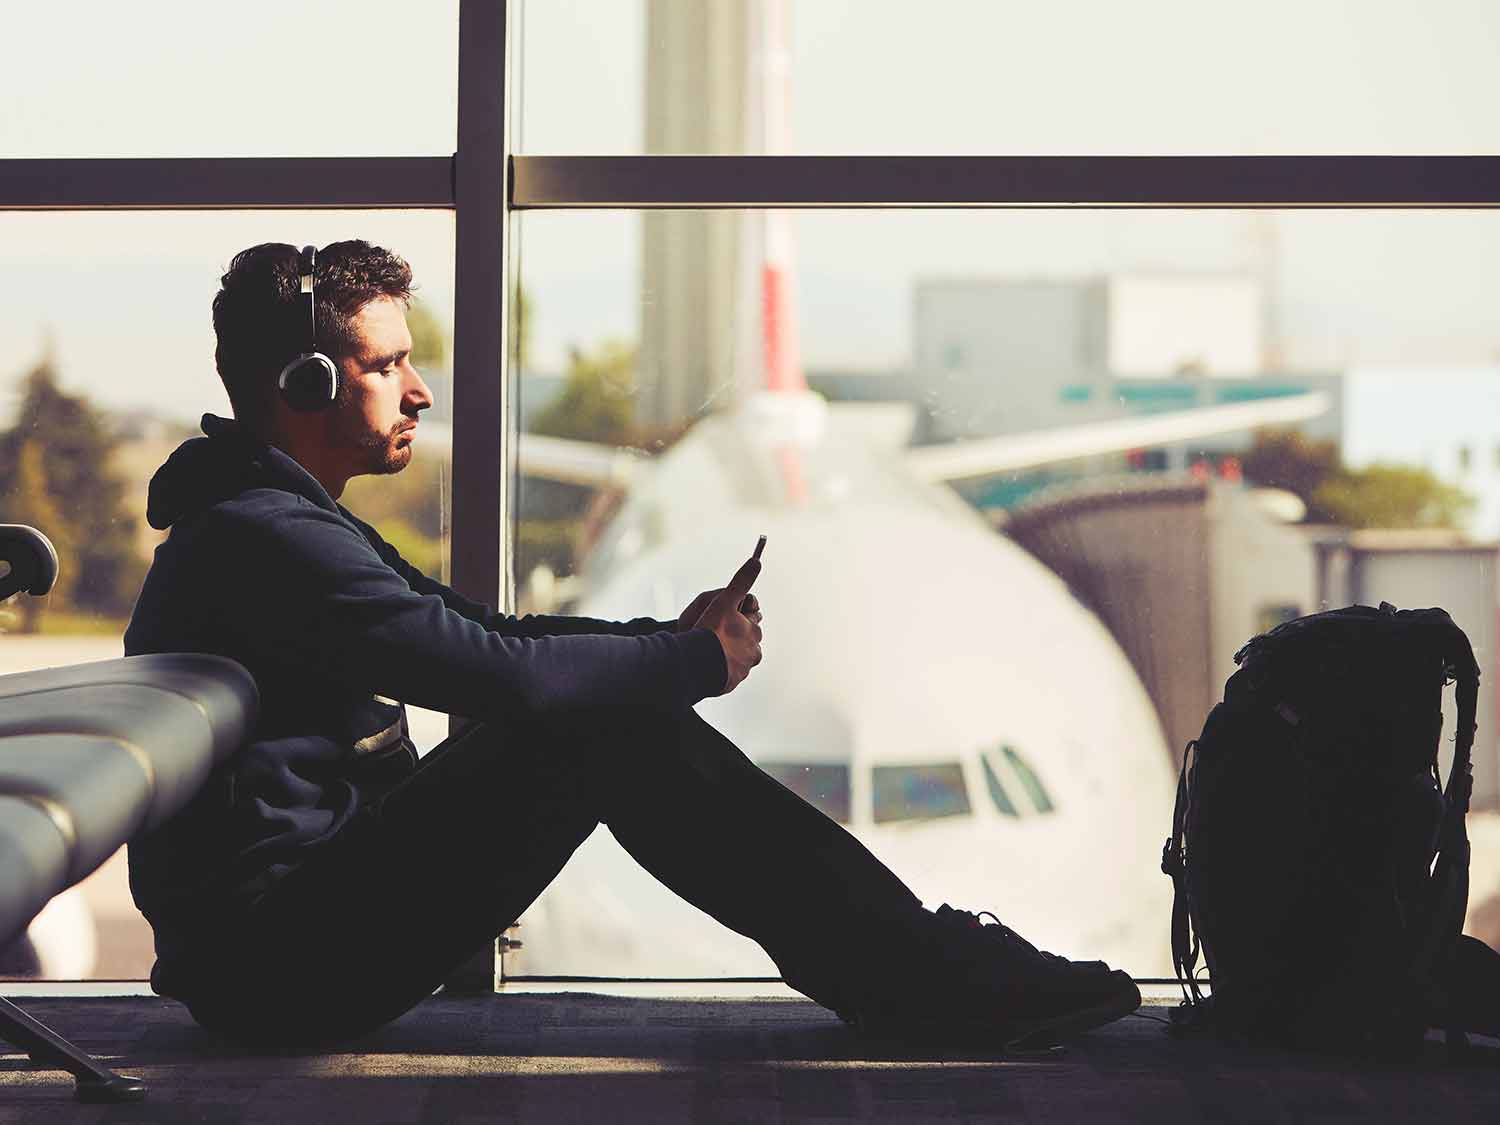 man sitting in airport